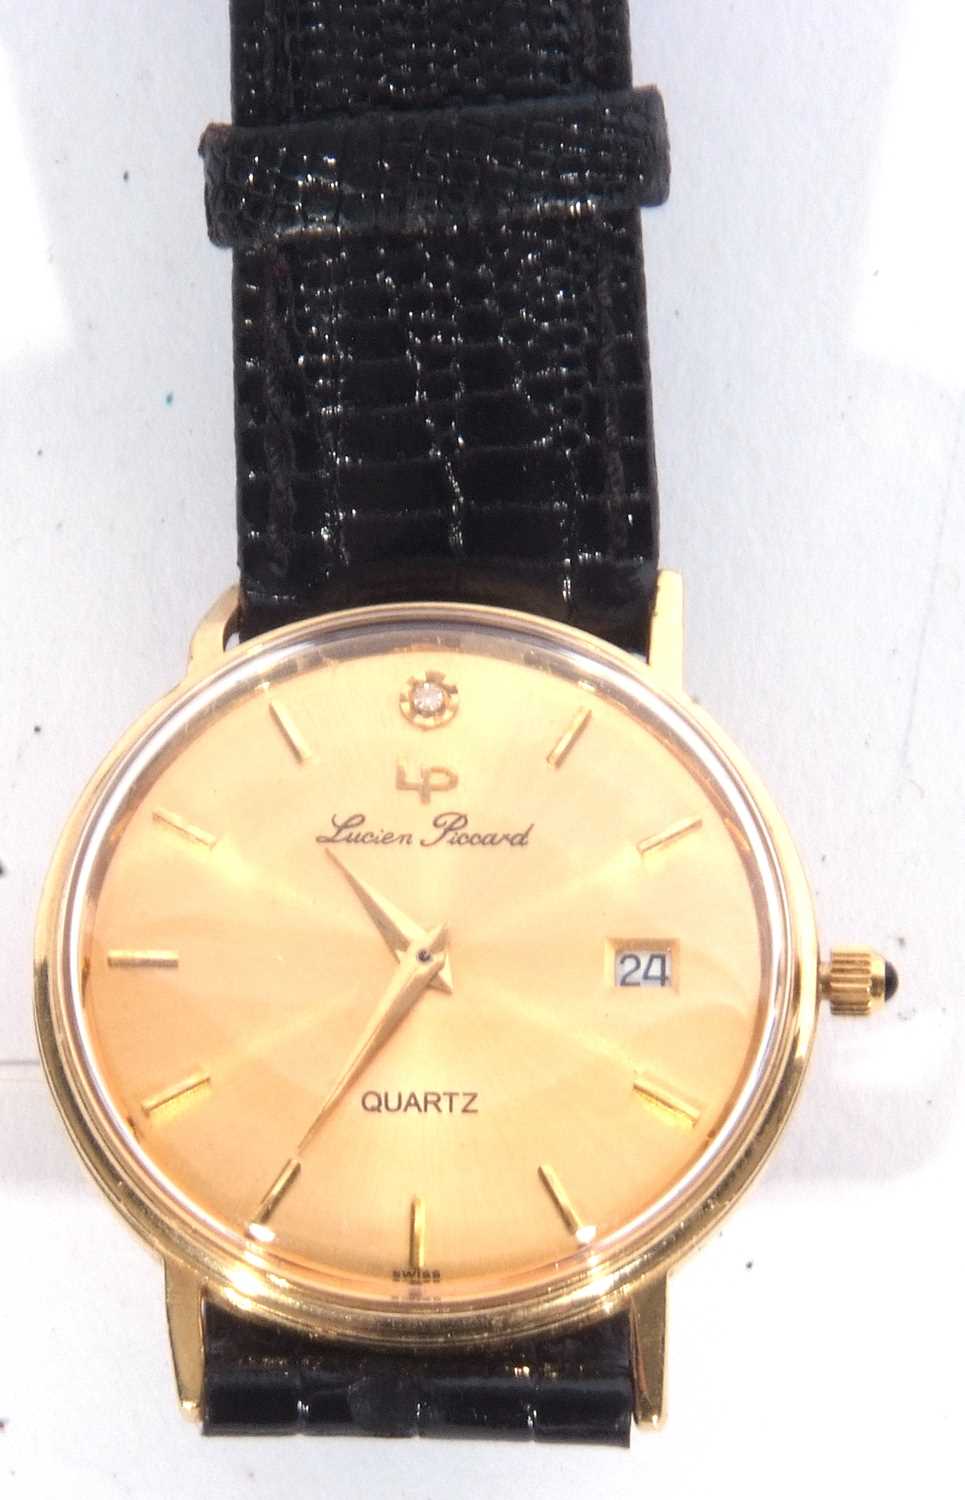 Lucien Picard 14ct gold gents wrist watch, the watch marked on back of case for 14ct gold, gold - Image 2 of 4